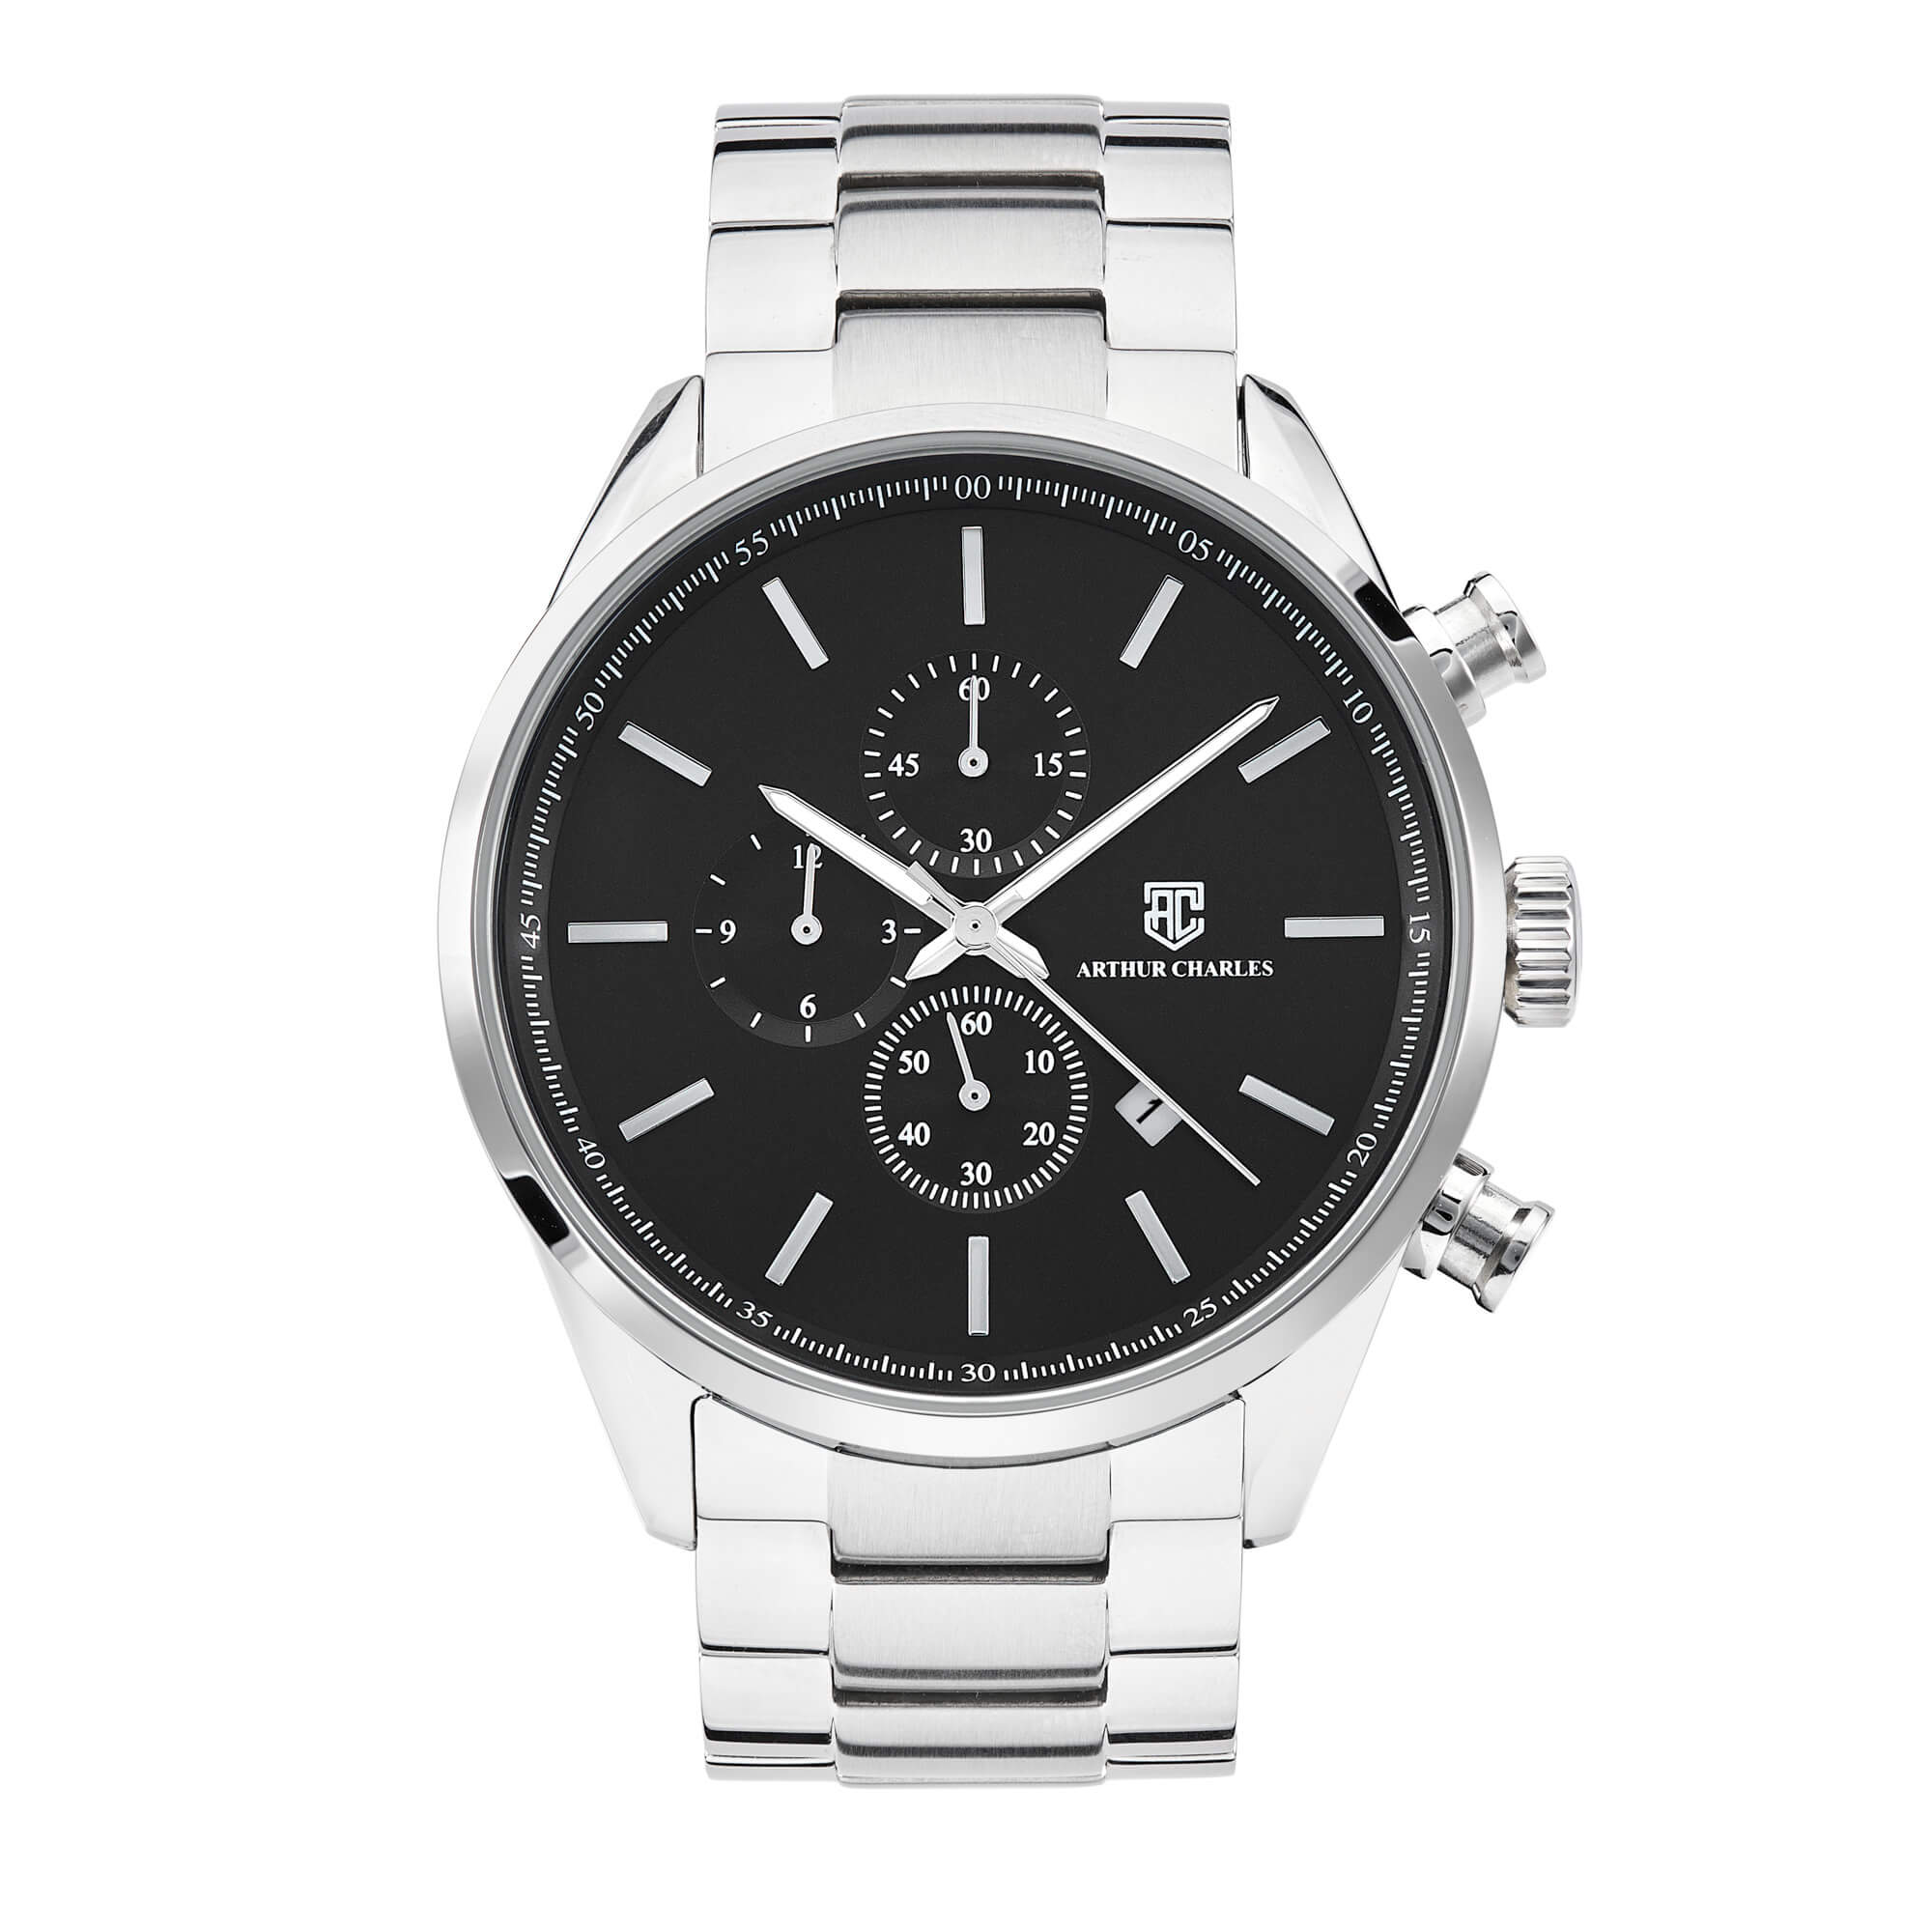 Front view of the men's Silver Chrono Master II watch. This watch has a black face with silver dials and hands. This watch has chronograph movement and is made from stainless steel. This watch has a 2 year Arthur Charles warranty.